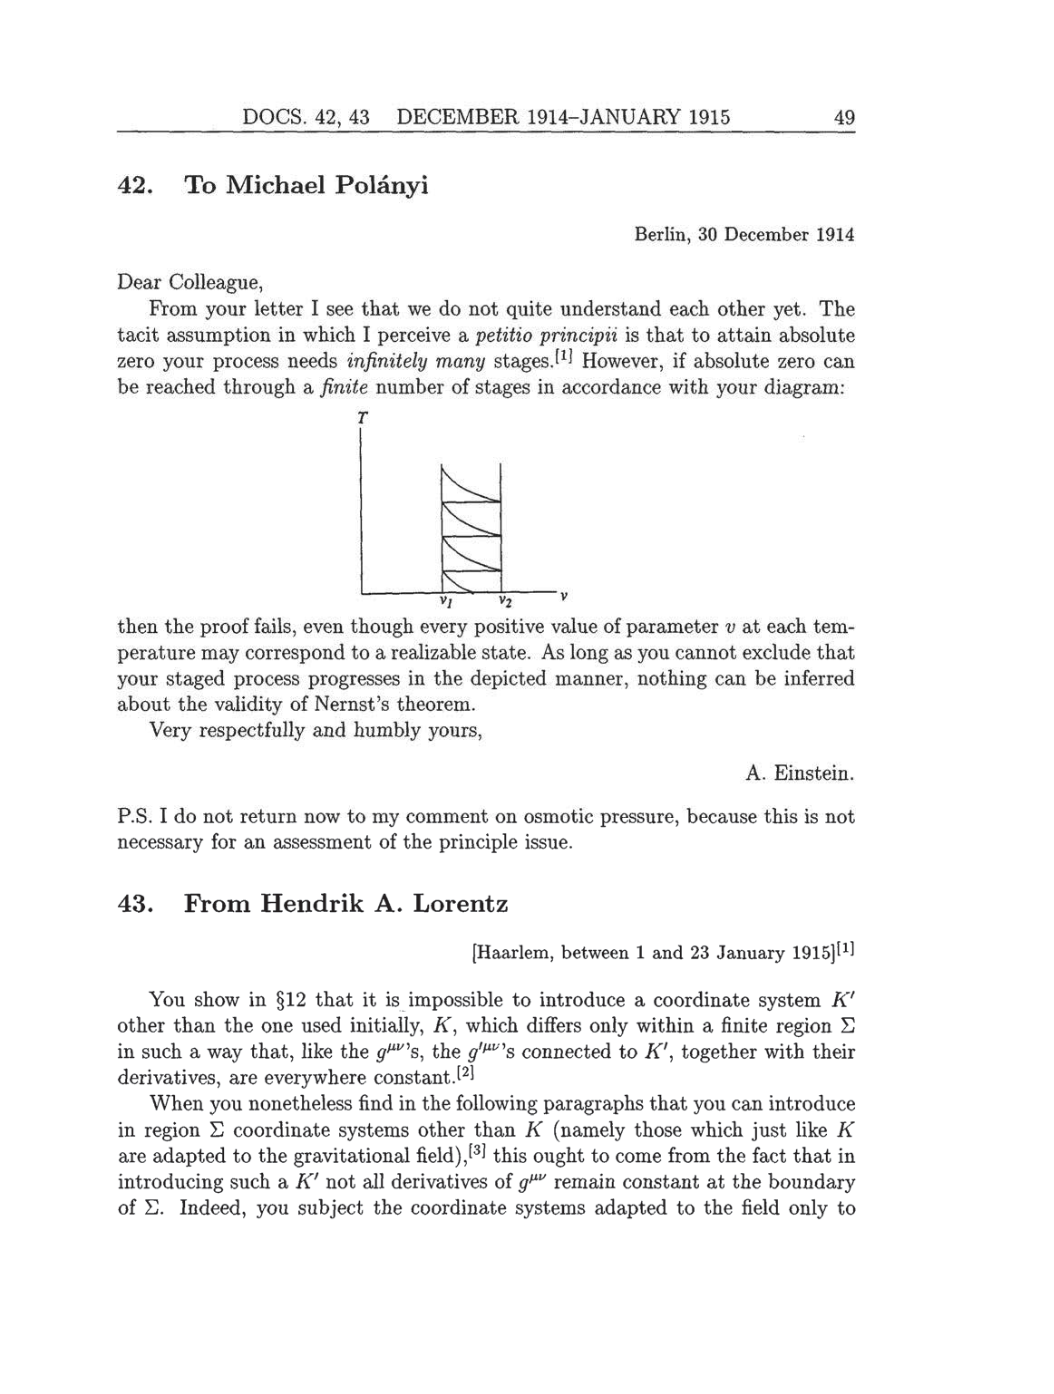 Volume 8: The Berlin Years: Correspondence, 1914-1918 (English translation supplement) page 49